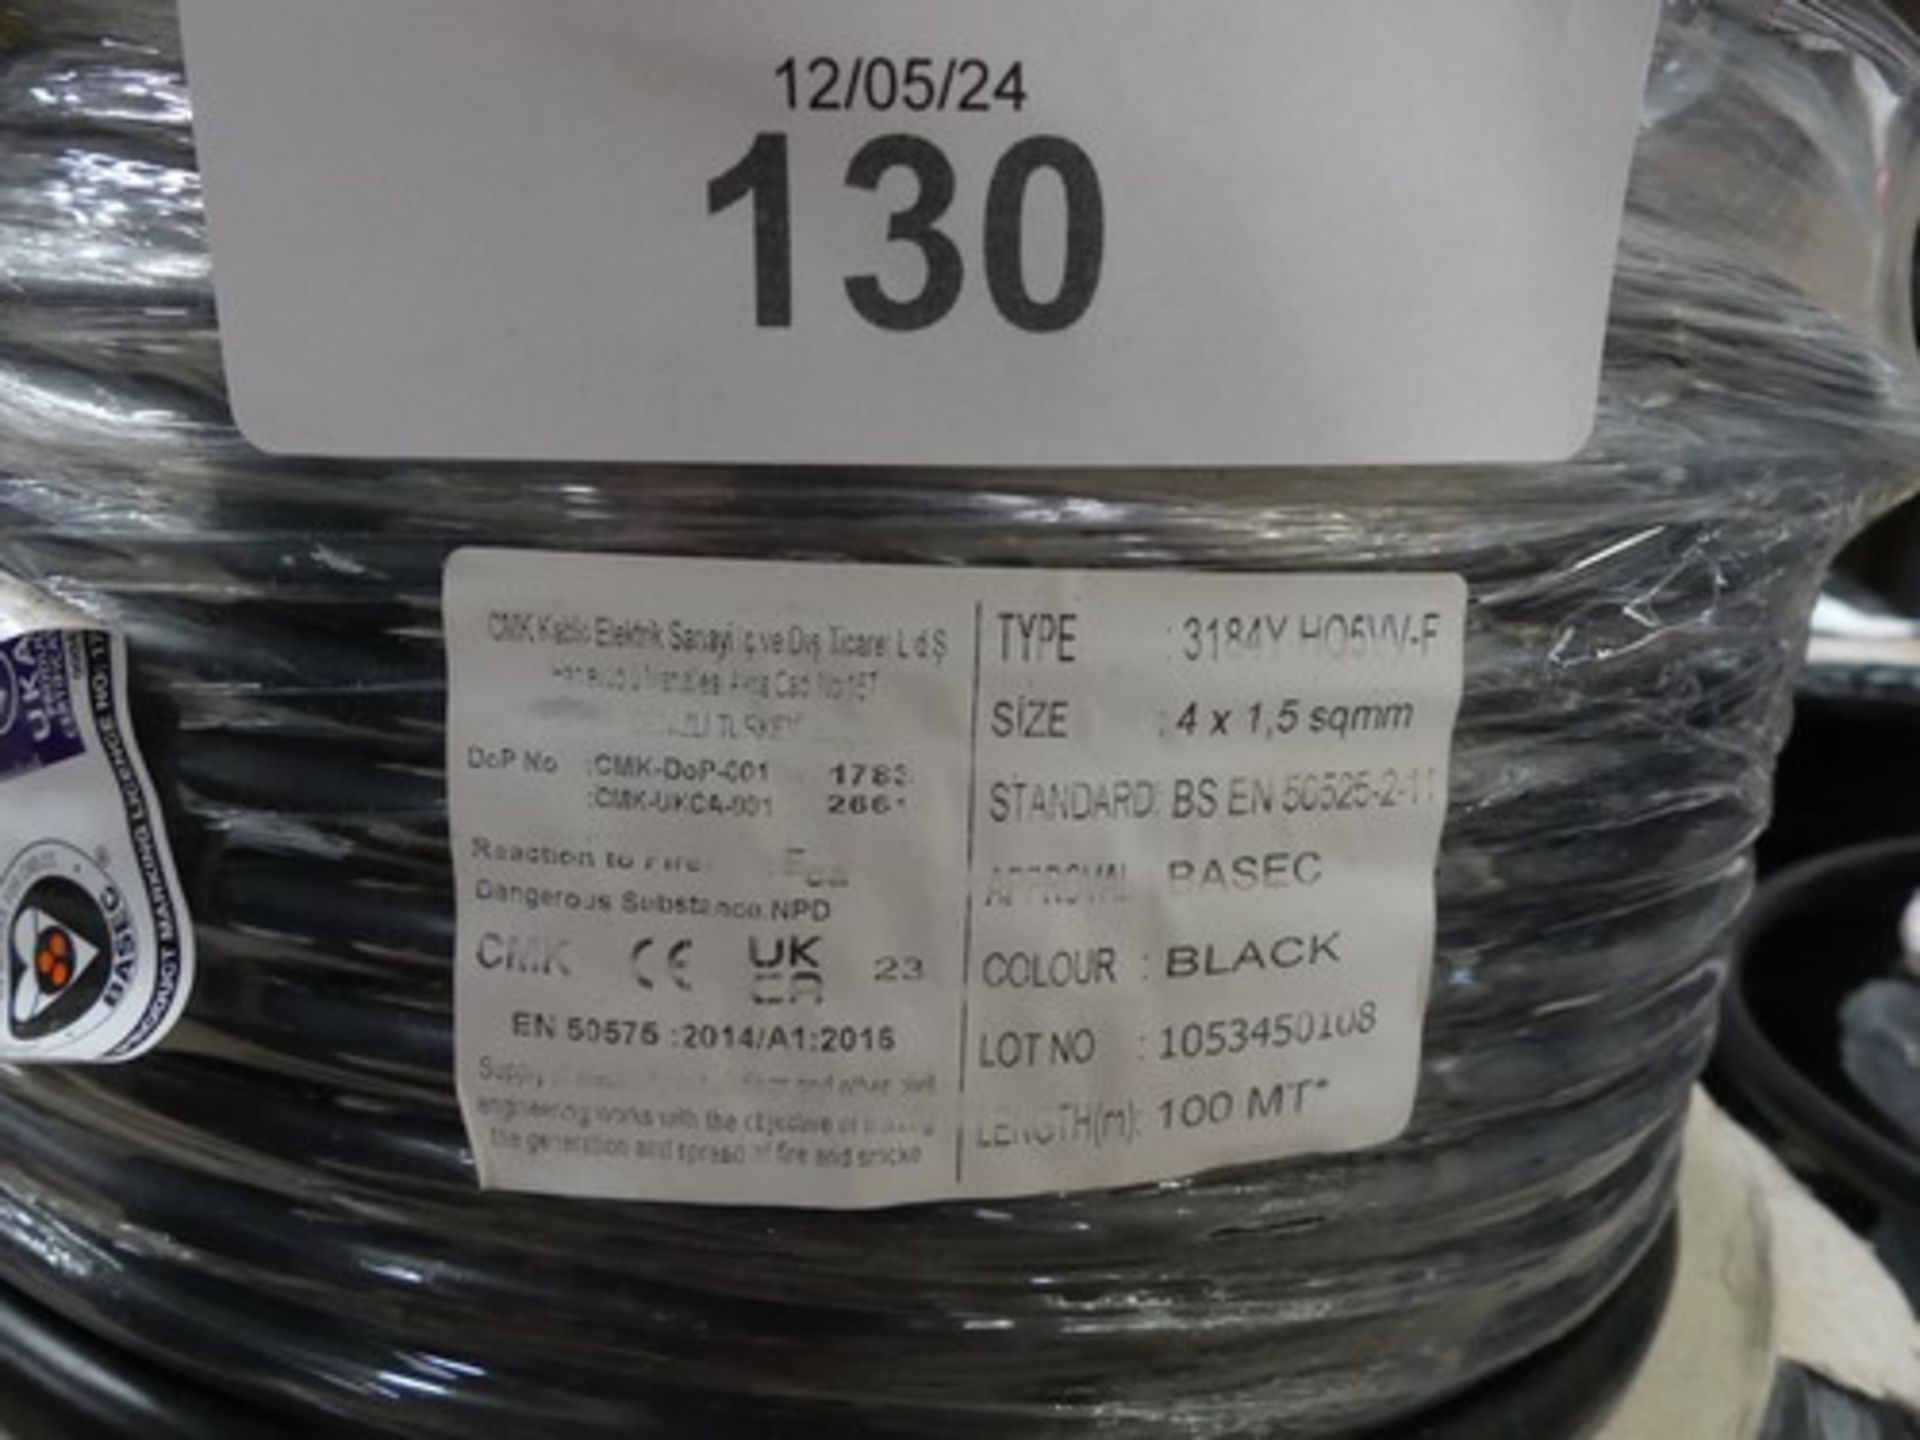 6 x 100m reels of Trident 4 core, 1.5mm BaseC cable - new (GSF13) - Image 3 of 3